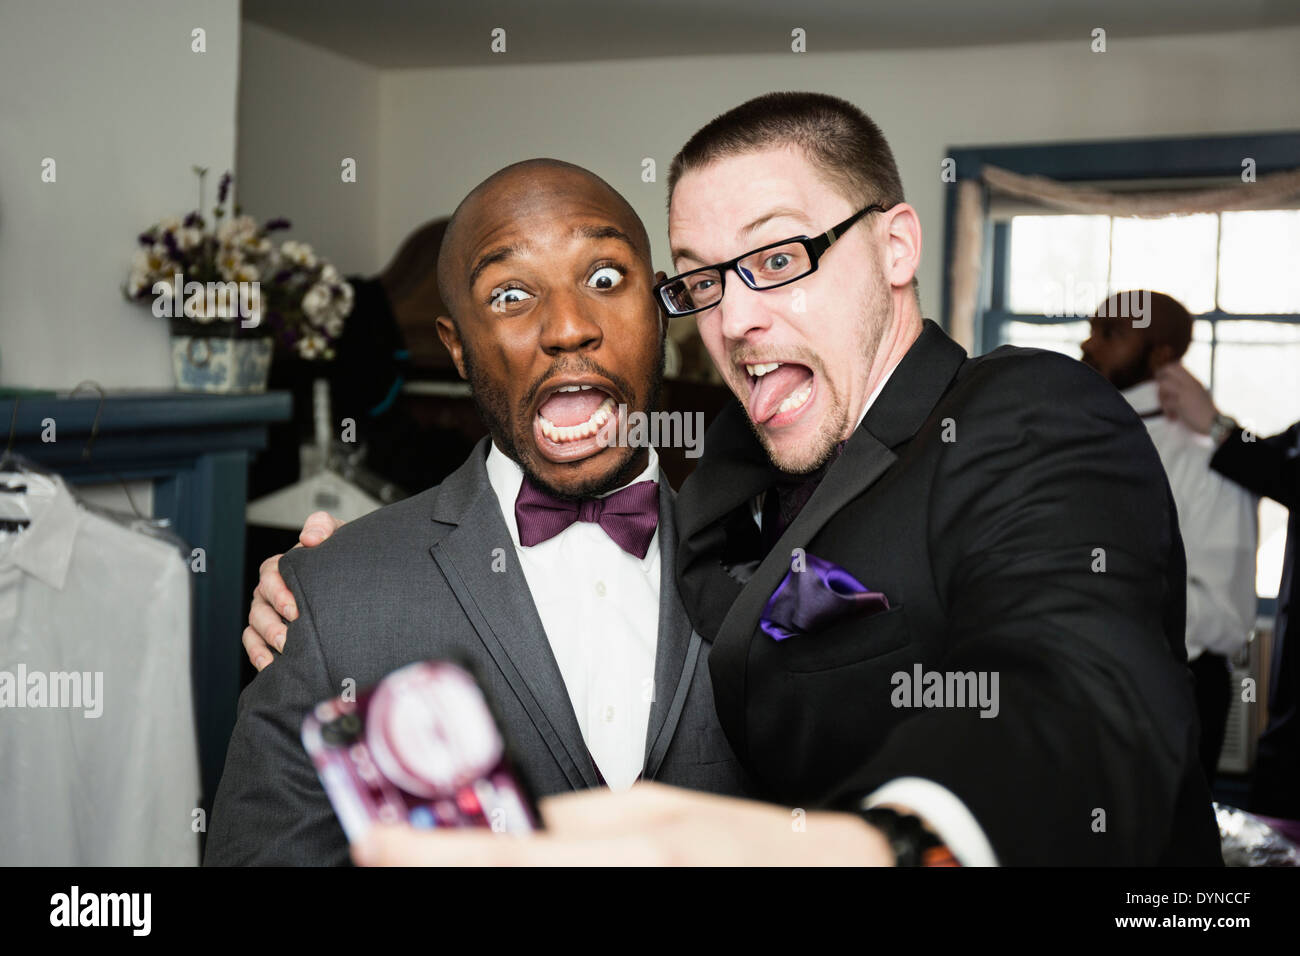 Groom and groomsman taking silly self-portrait Stock Photo